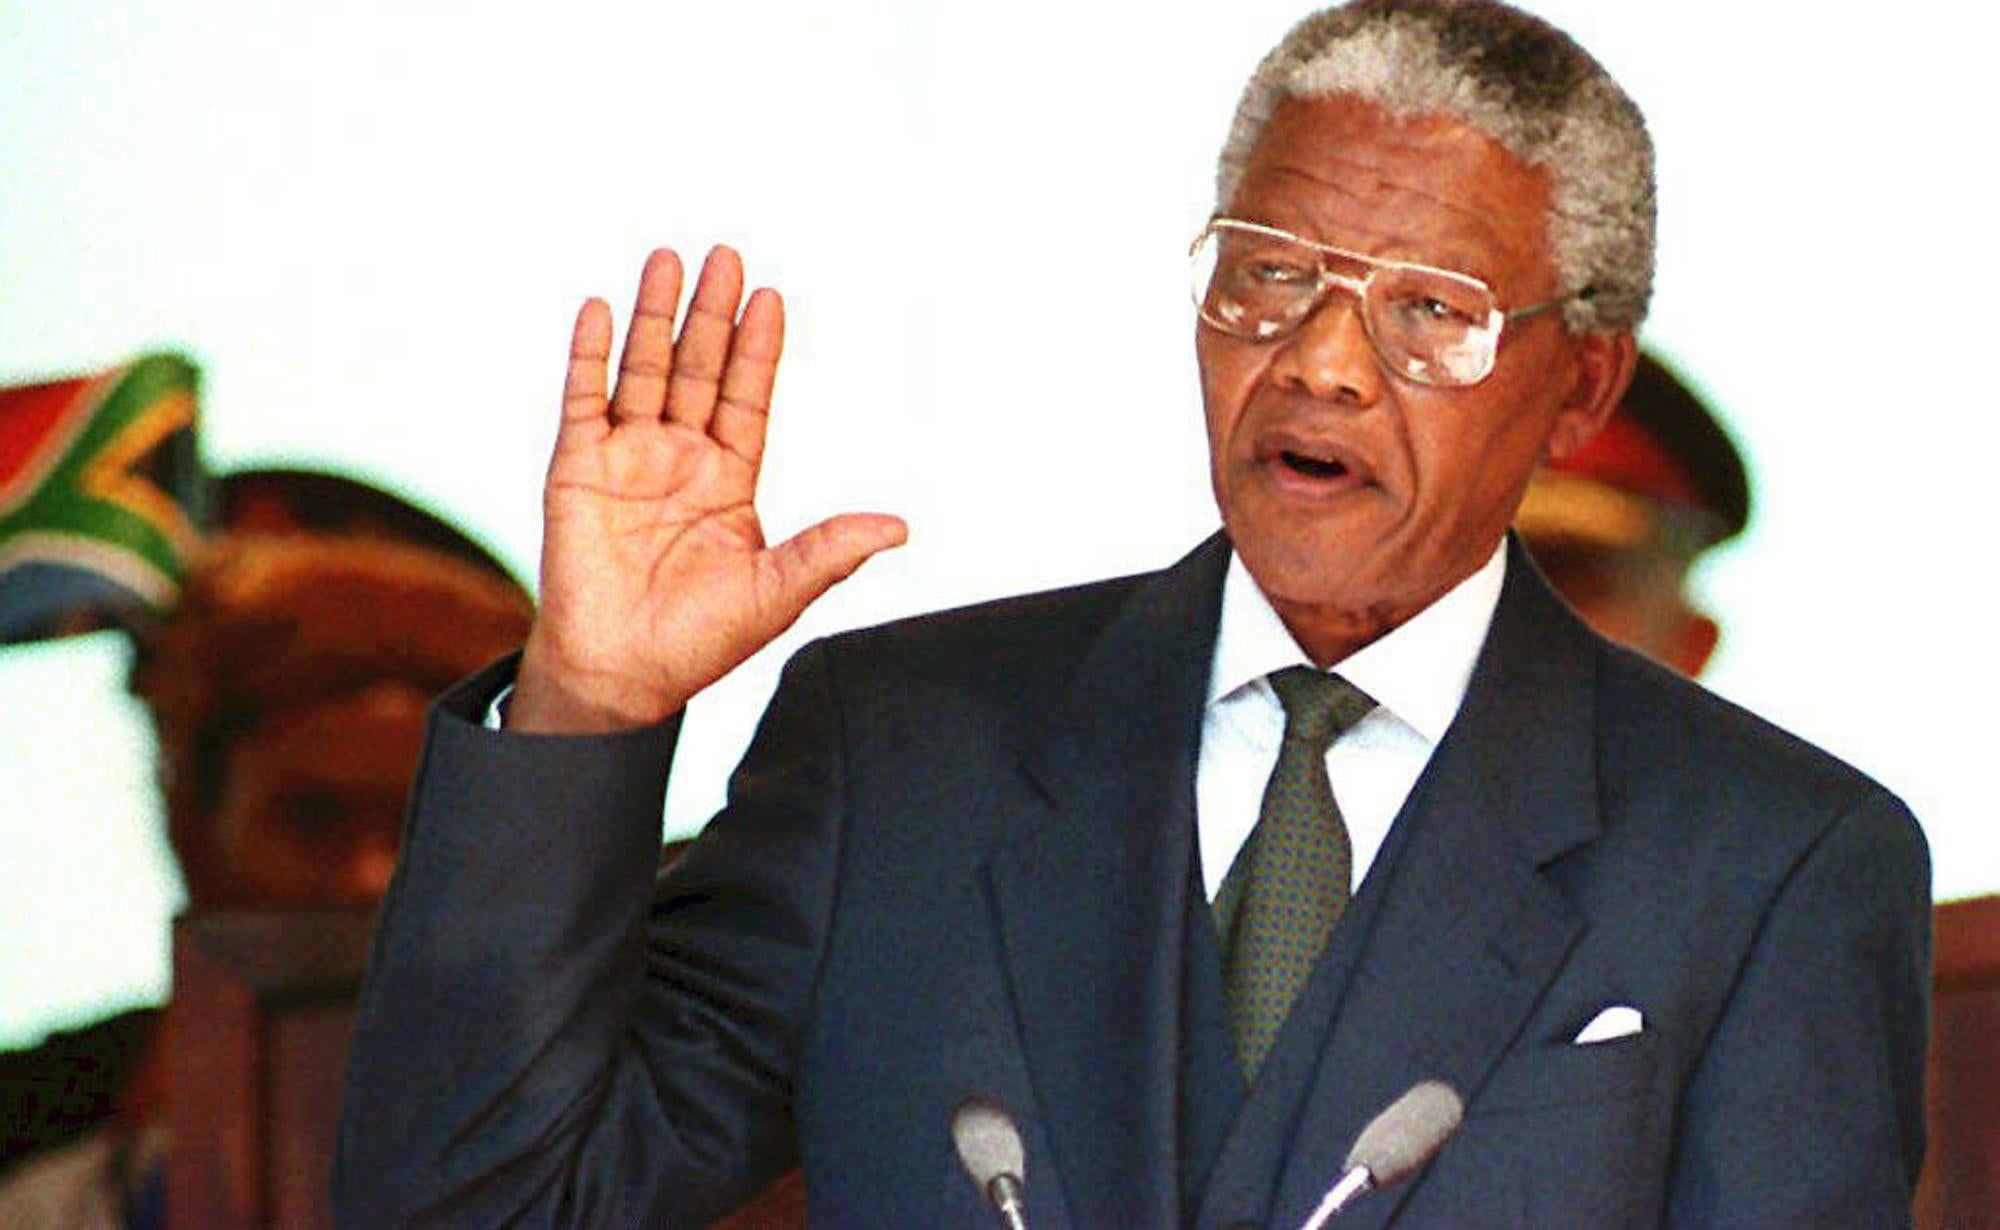 10 Nelson Mandela Quotes That Hit Home In Today's Political Climate
